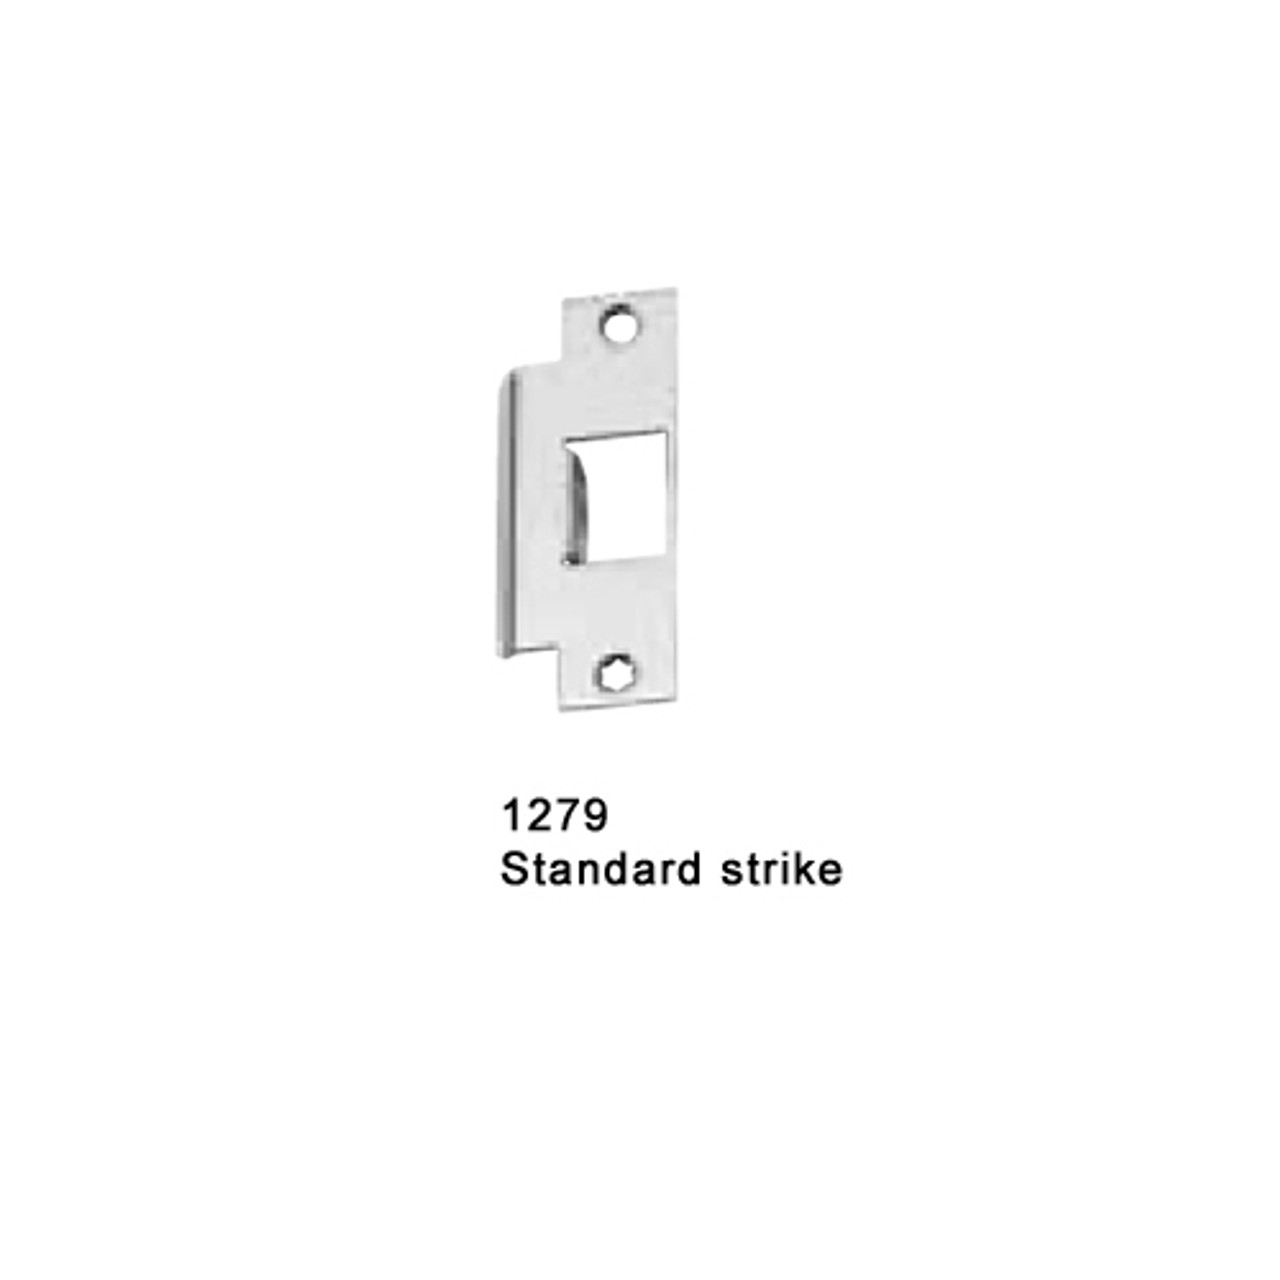 F-25-M-TP-BE-US28-3-LHR Falcon 25 Series Fire Rated Mortise Lock Devices 512TP-BE Thumbpiece Trim with Blank Escutcheon in Anodized Aluminum